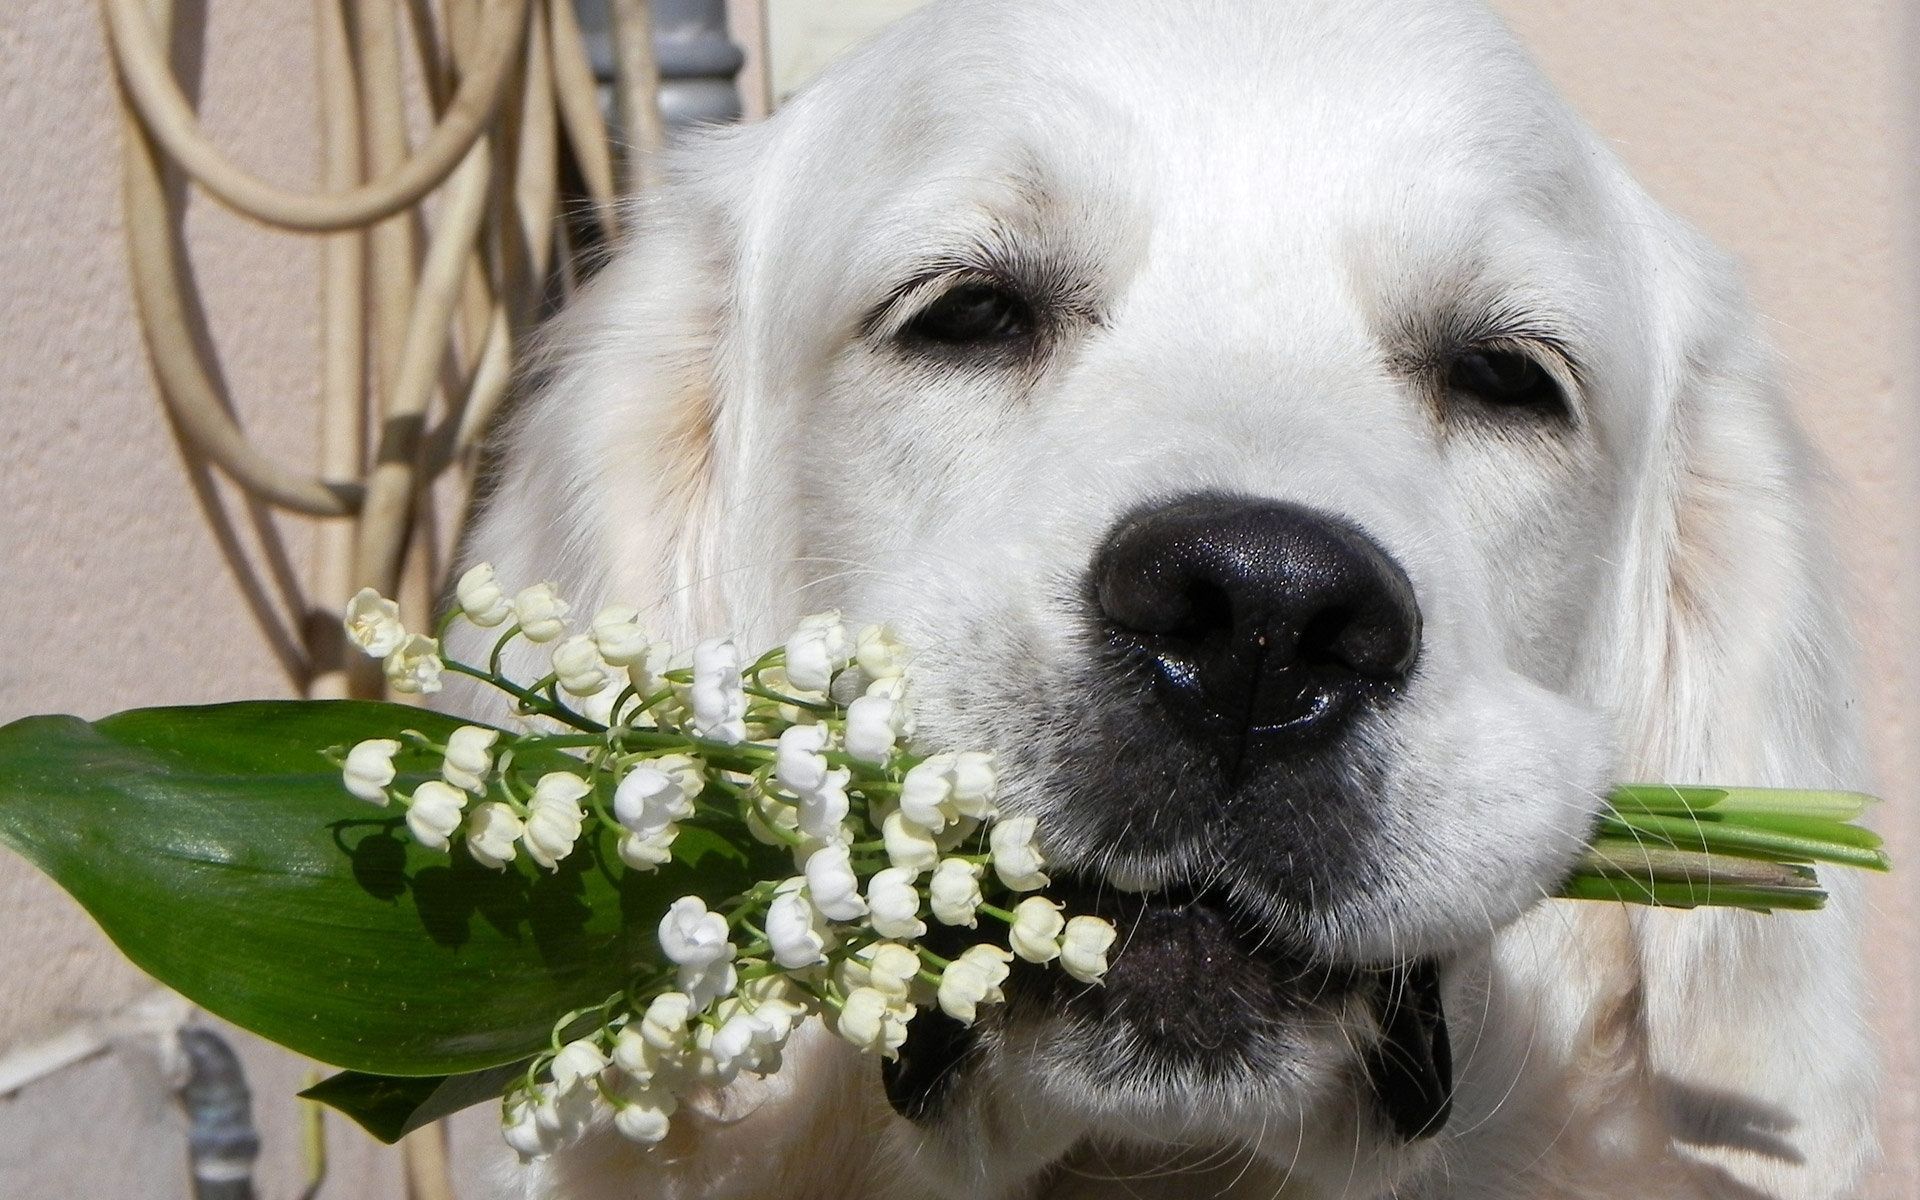 lily of the valley, animals, flowers, dog, muzzle, bouquet, nose